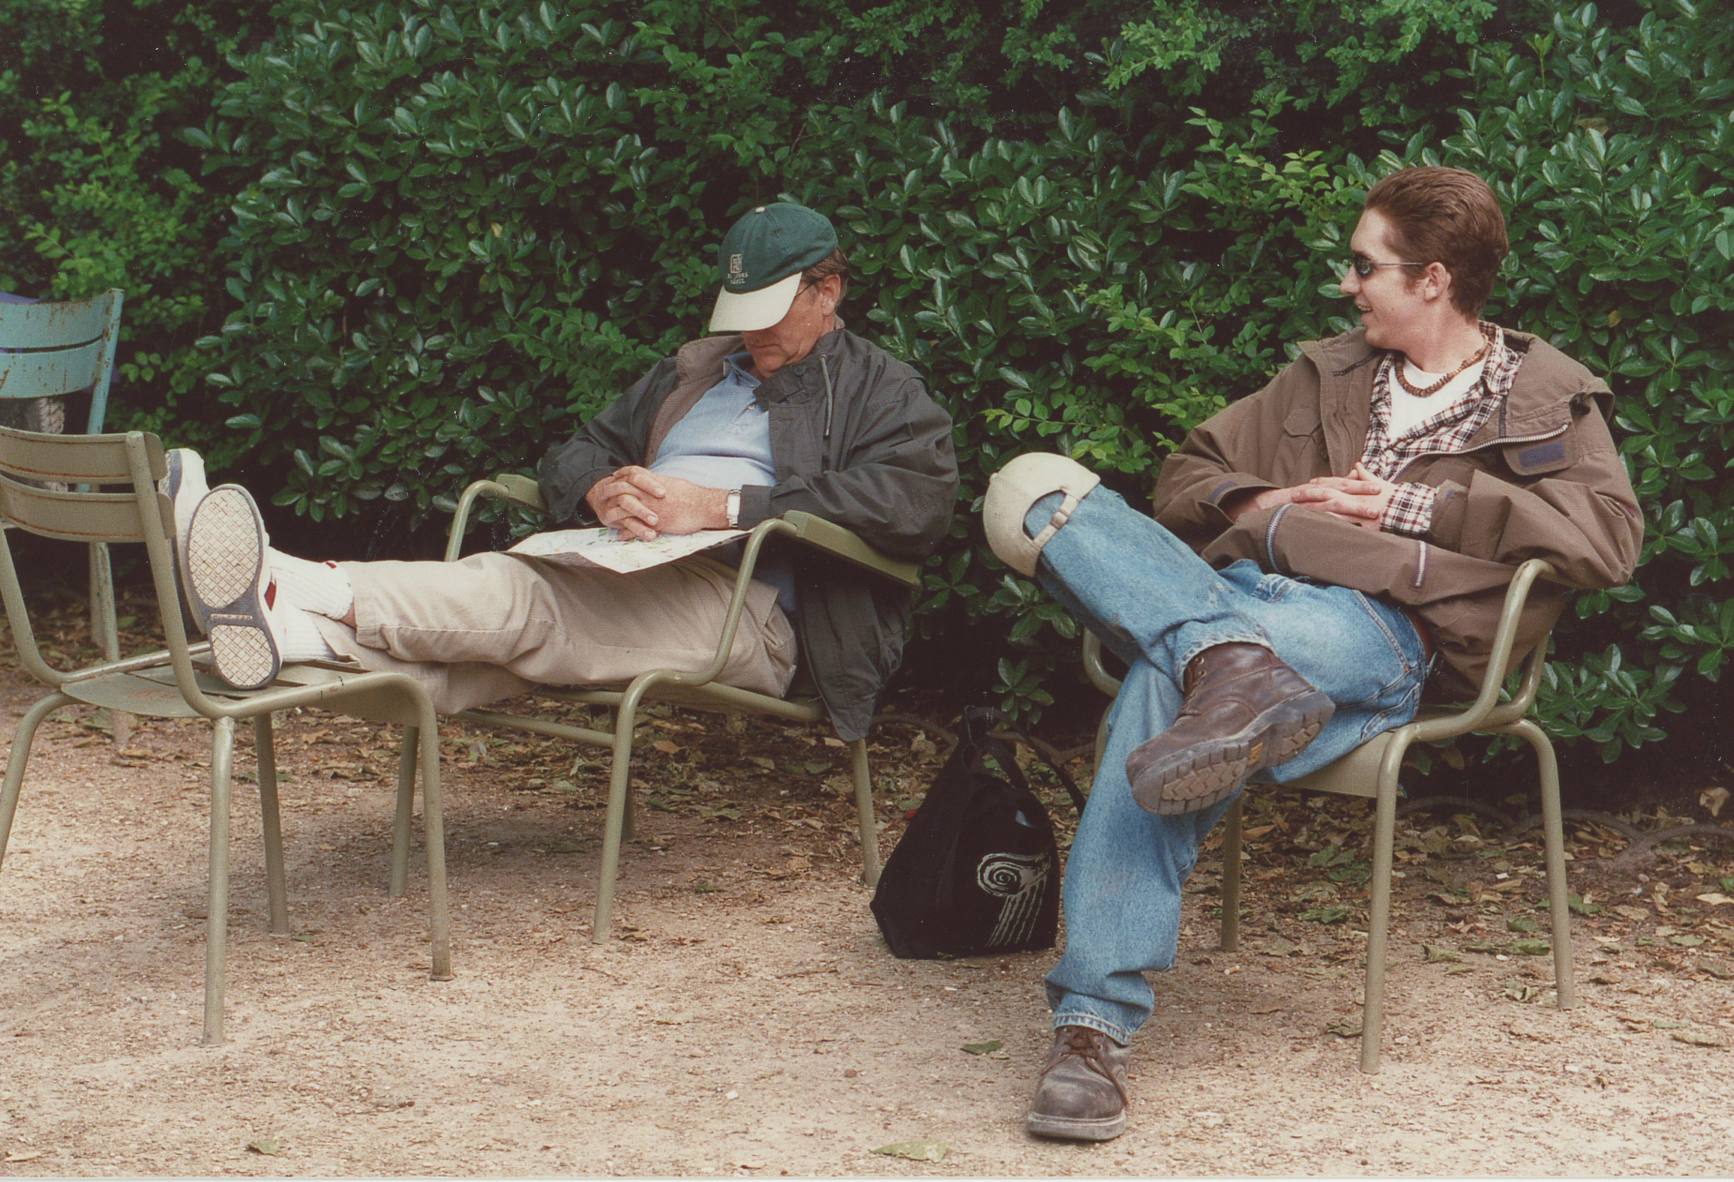 Frank James and his son Paul in the Luxembourg Gardens / walking everywhere takes it's toll.
Photo ©2001 Ann James Massey